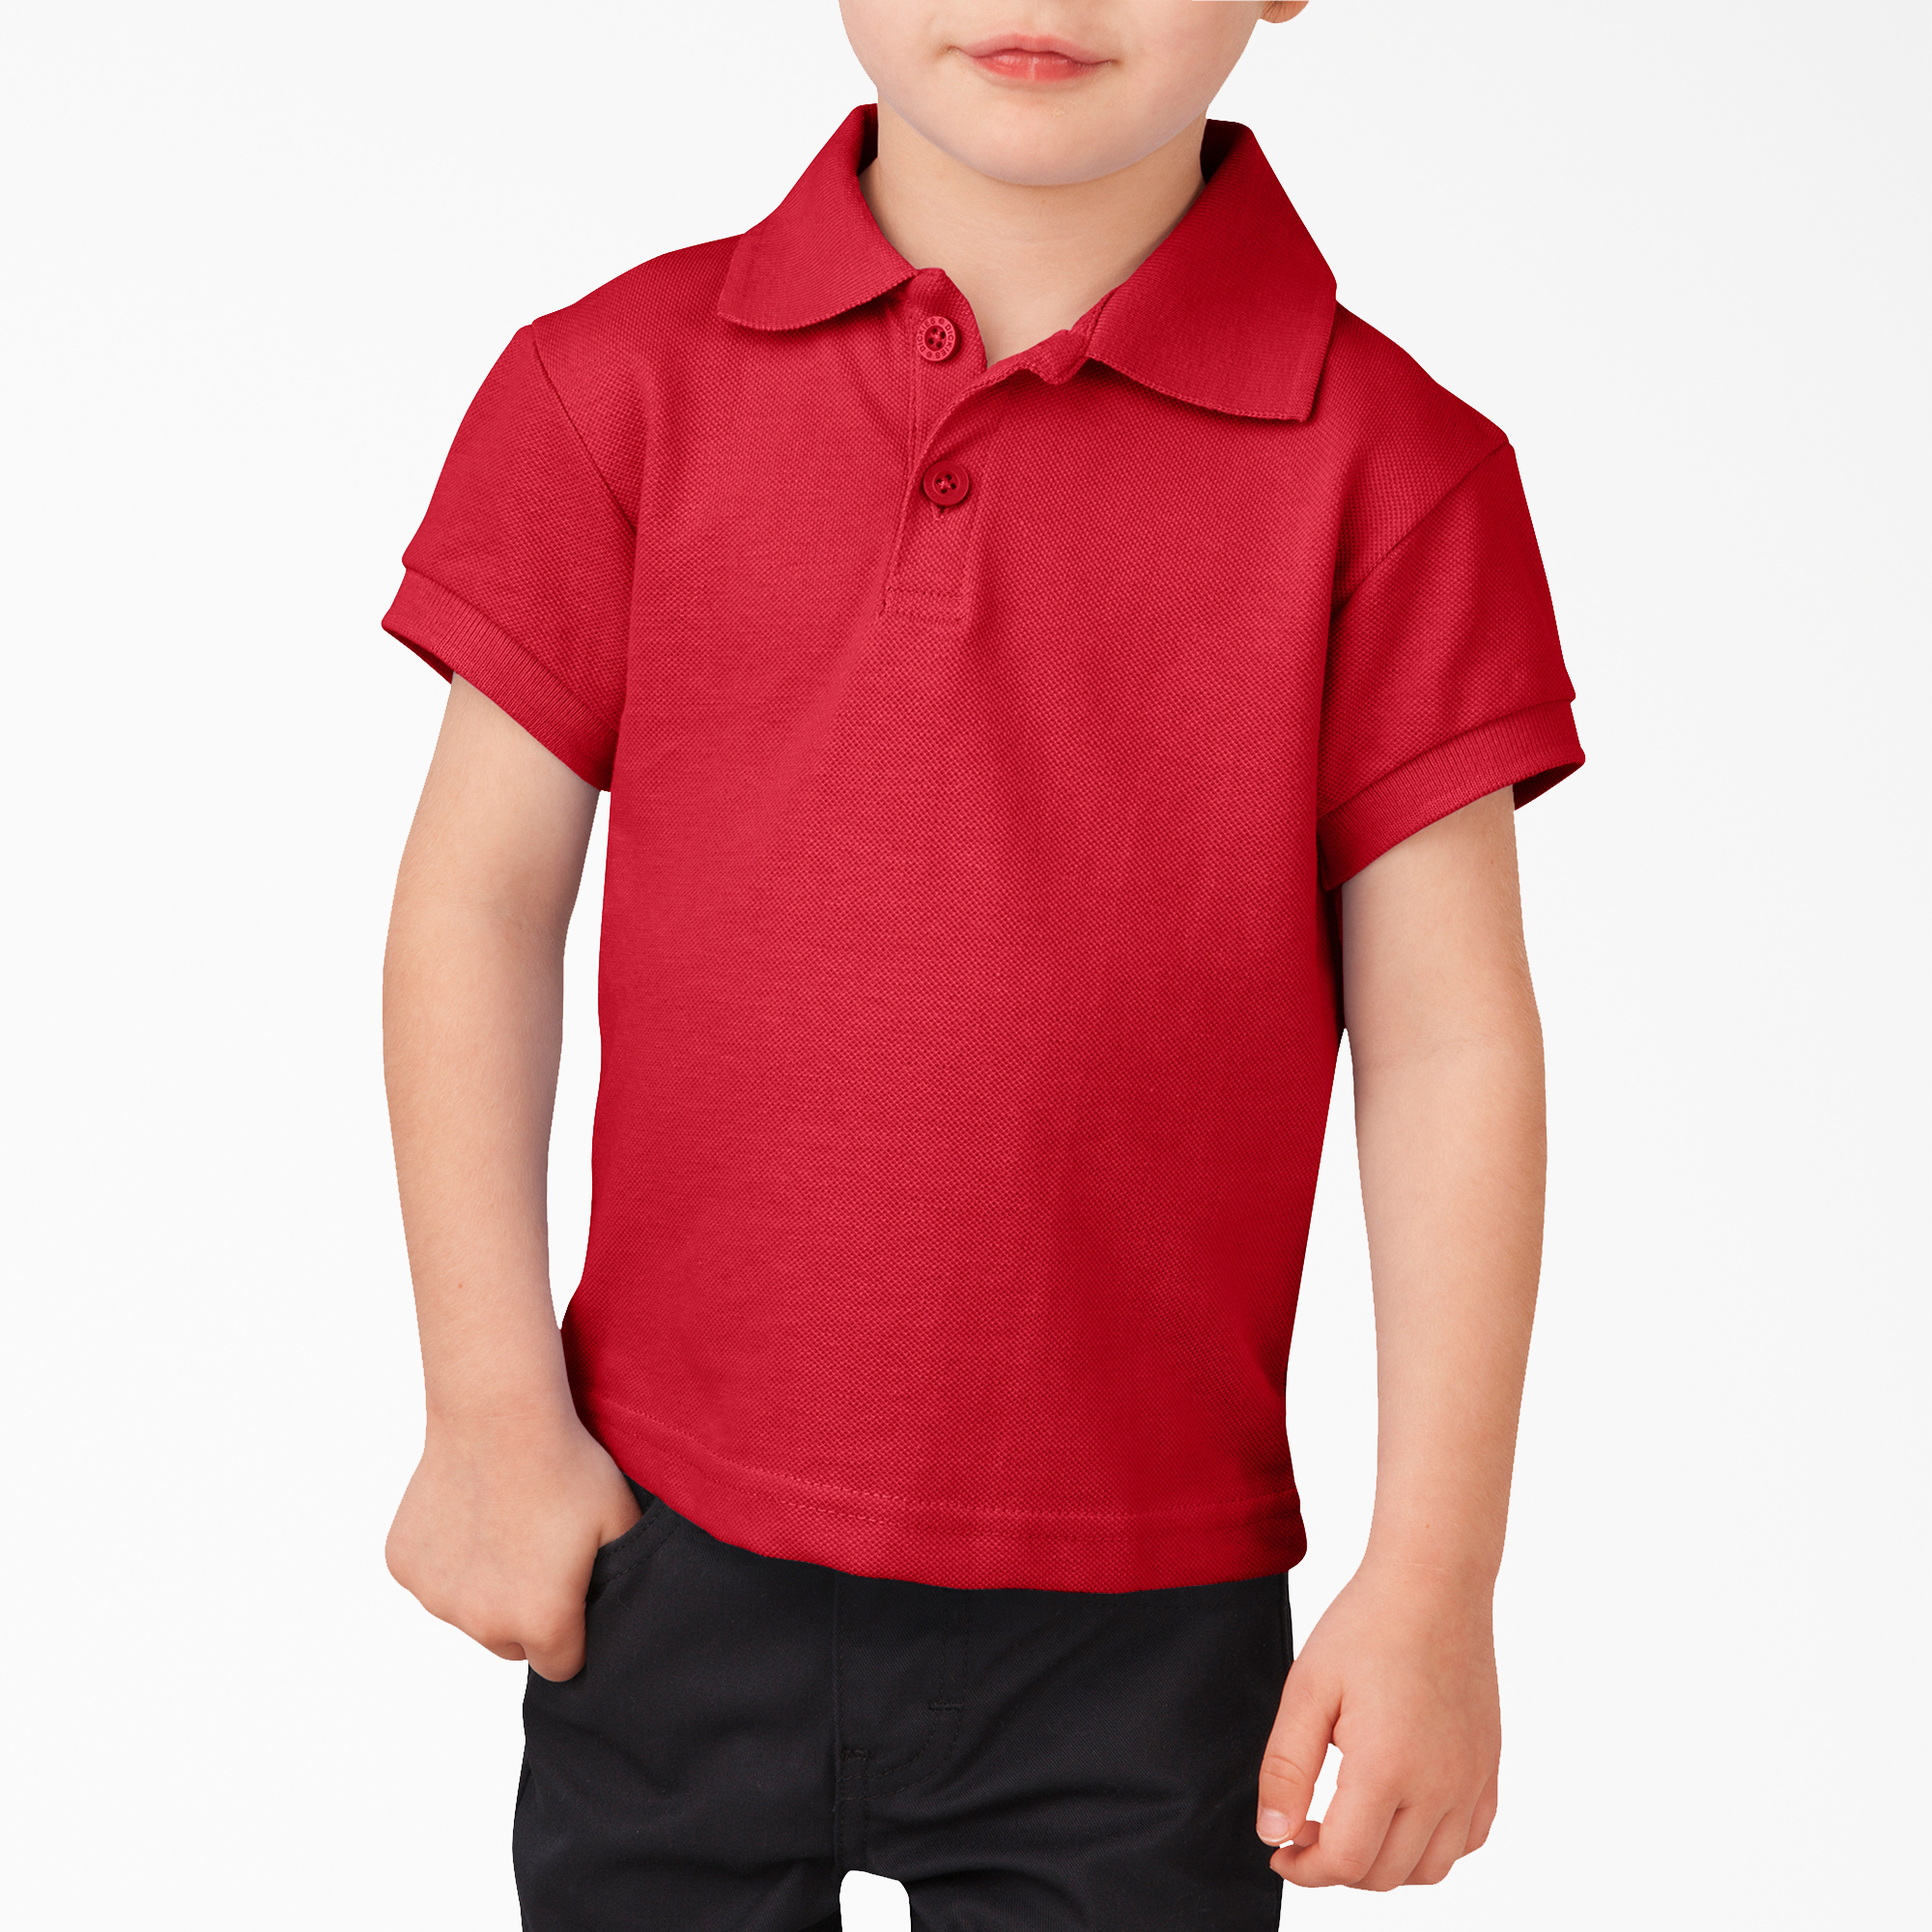 red shirts for boys